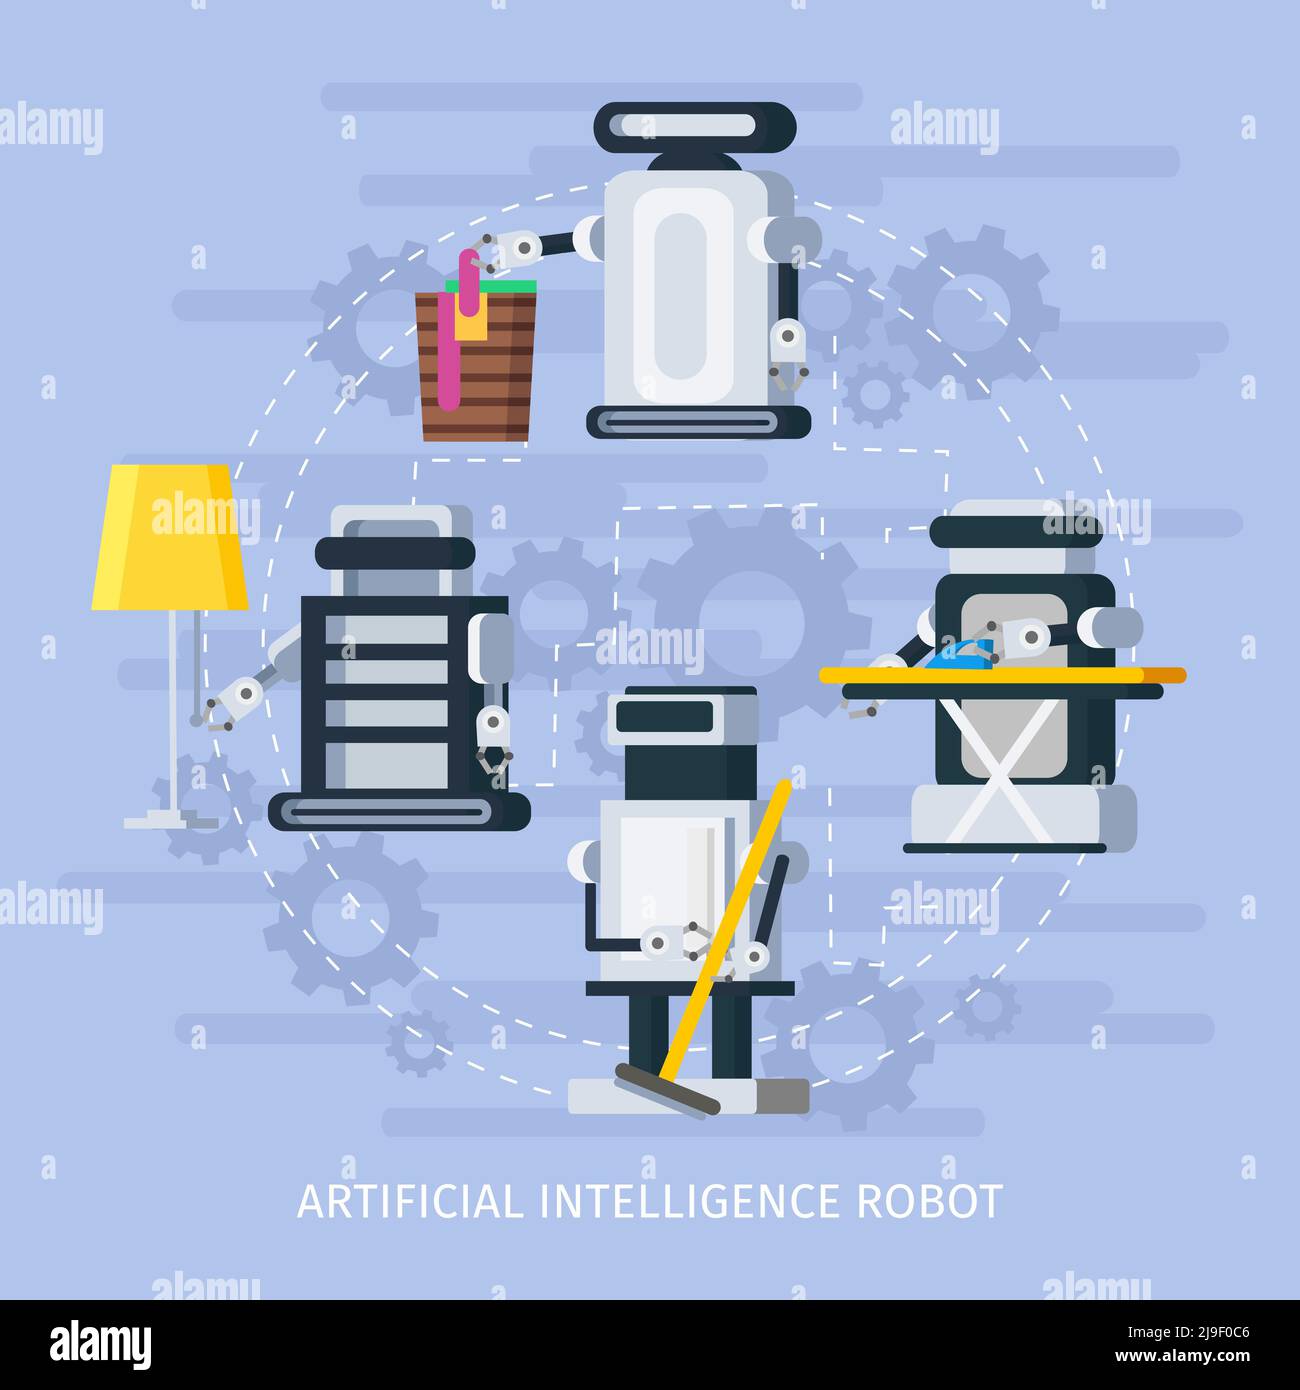 Artificial intelligence composition with robots assisting people in different housekeeping functions vector illustration Stock Vector